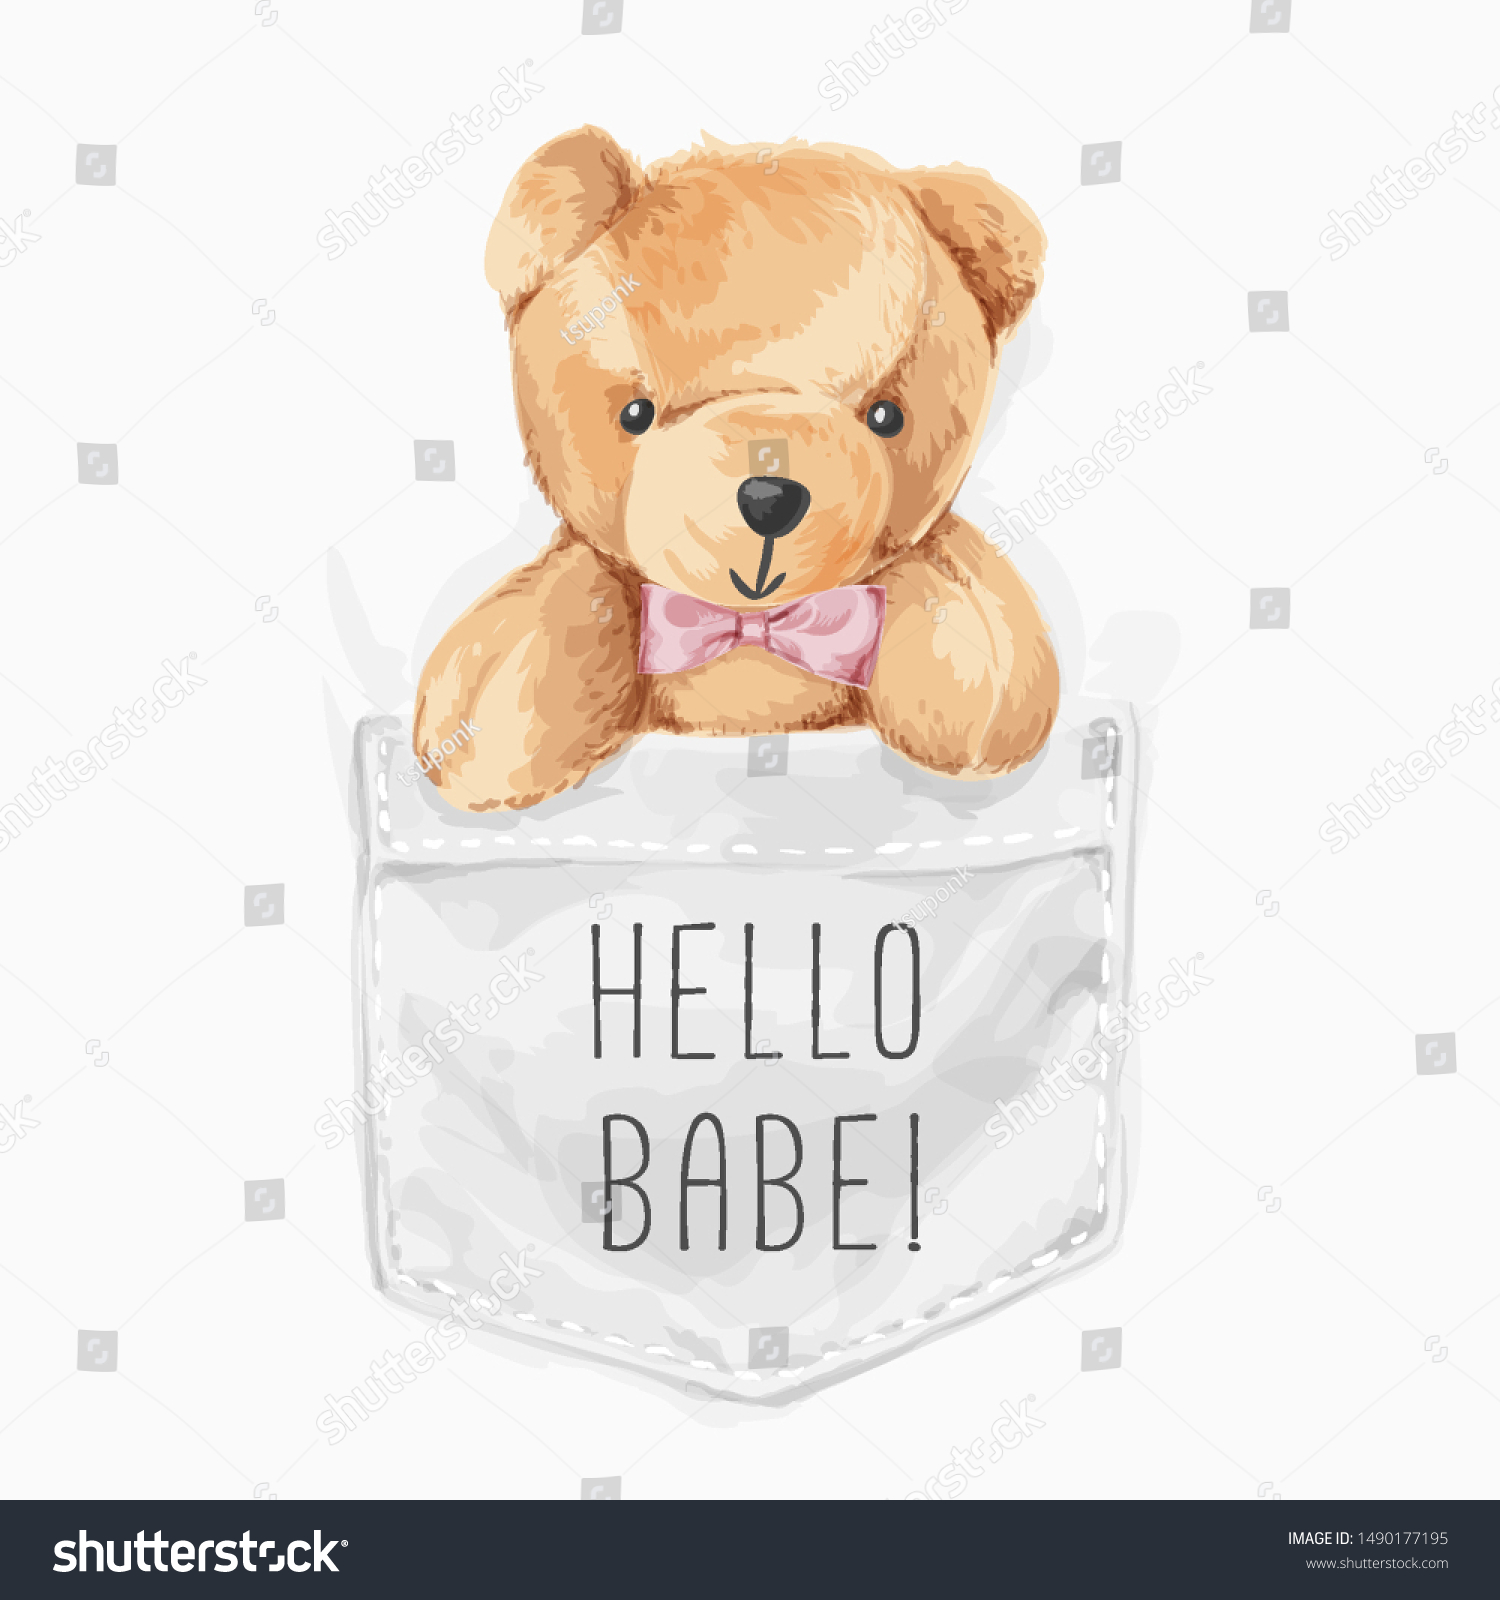 SVG of hello babe slogan with bear toy in pocket illustration svg